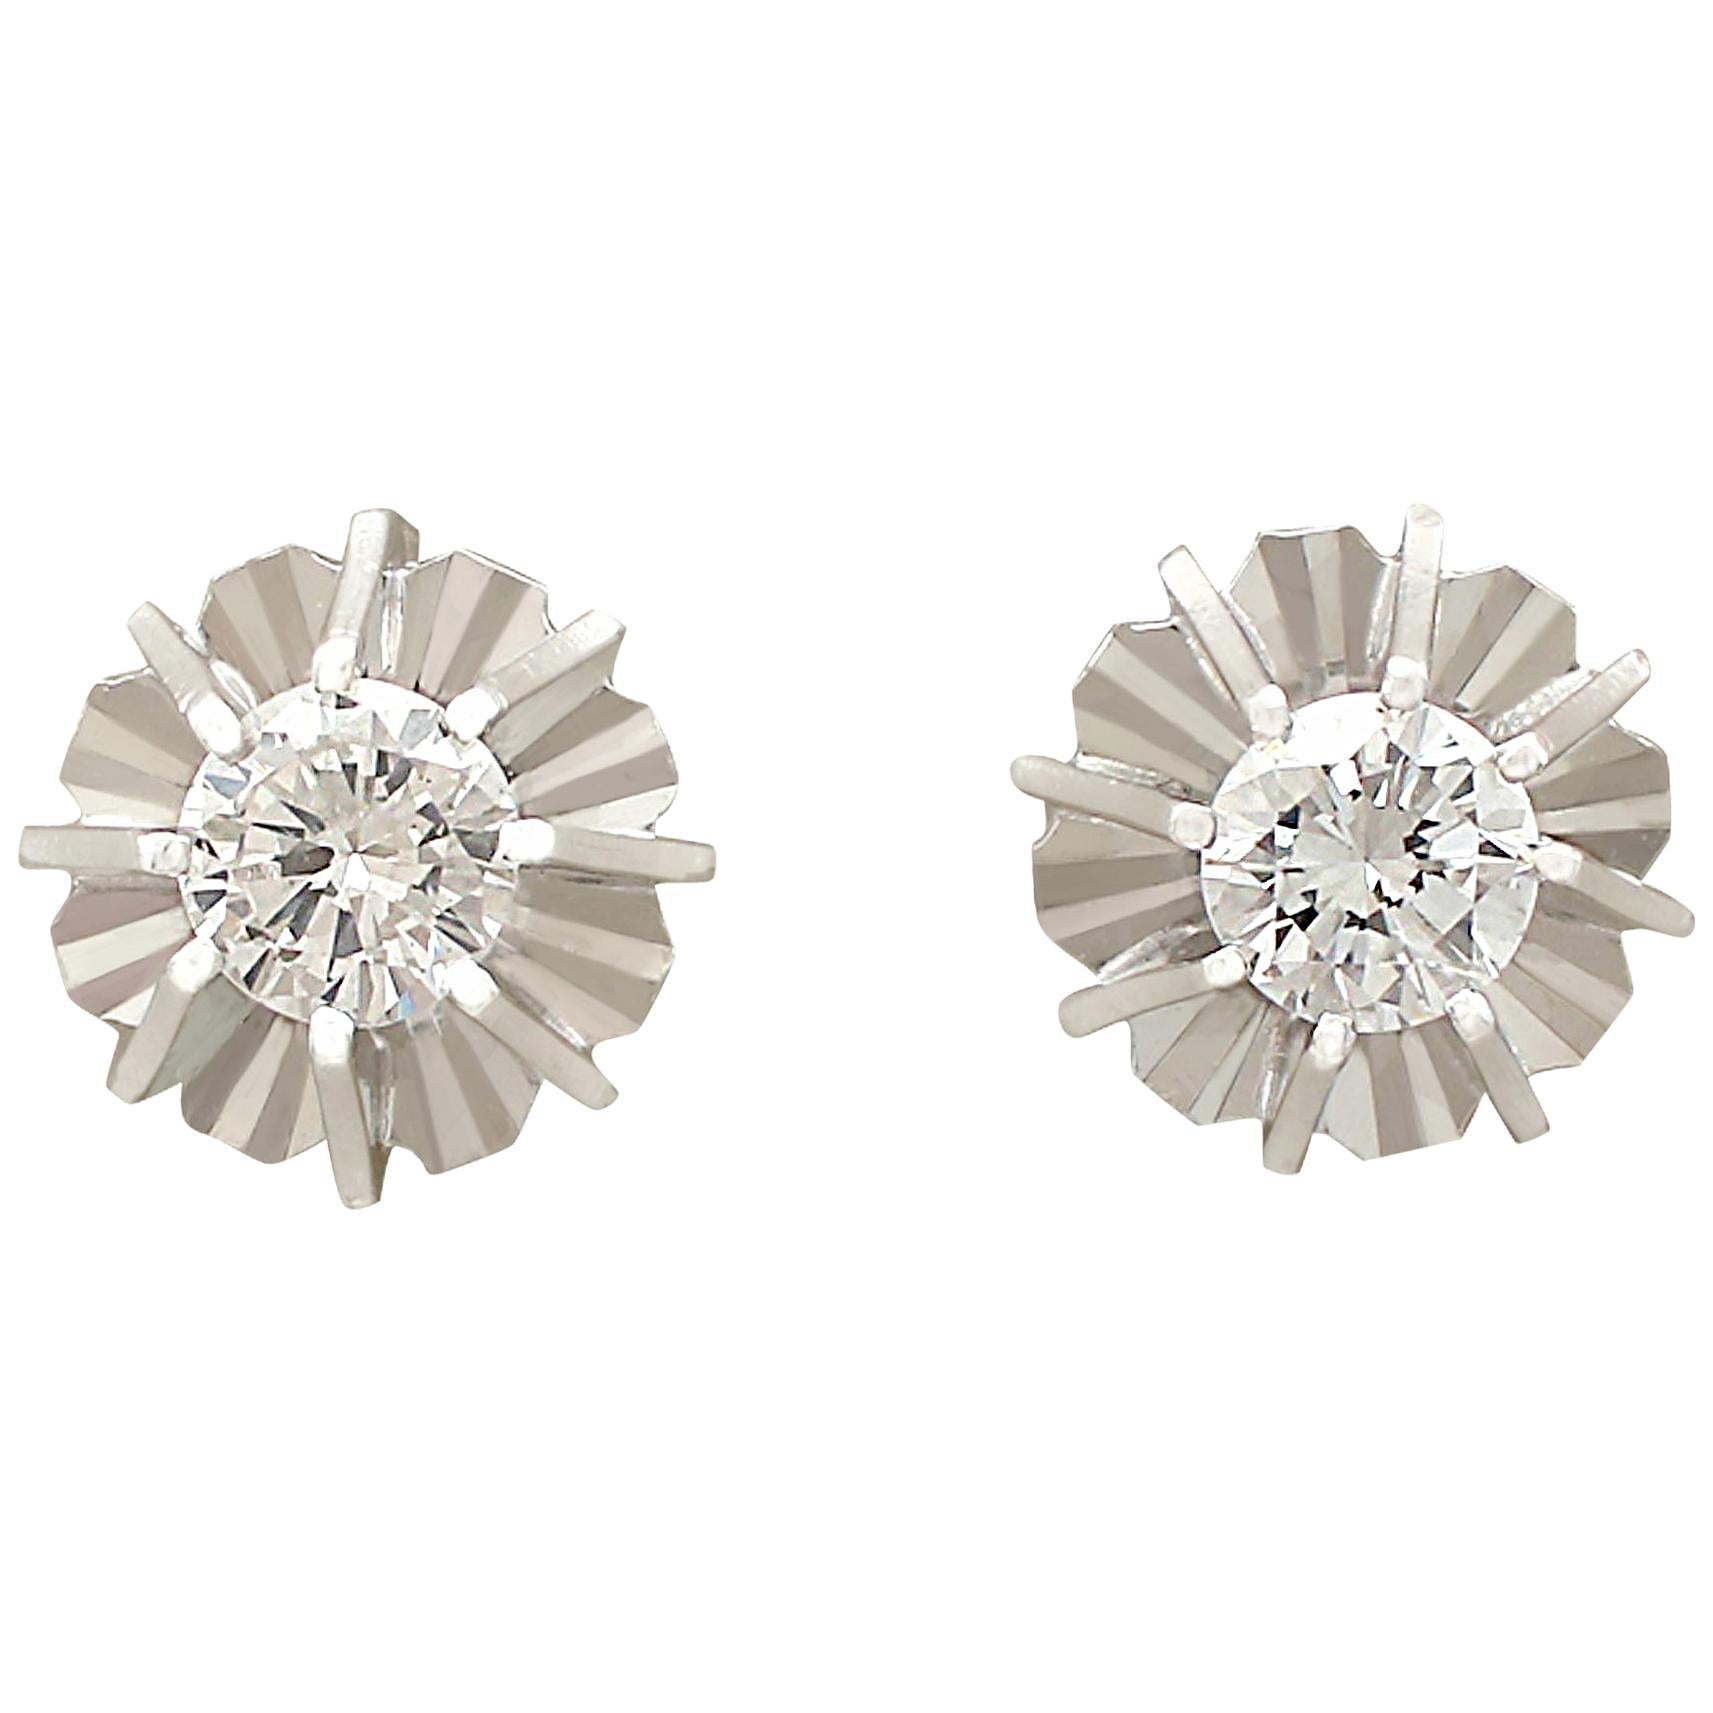 An impressive pair of vintage 0.56 carat diamond and 18 karat white gold stud style earrings; part of our diverse diamond jewellery and estate jewelry collections.

These fine and impressive diamond stud earrings have been crafted in 18k white